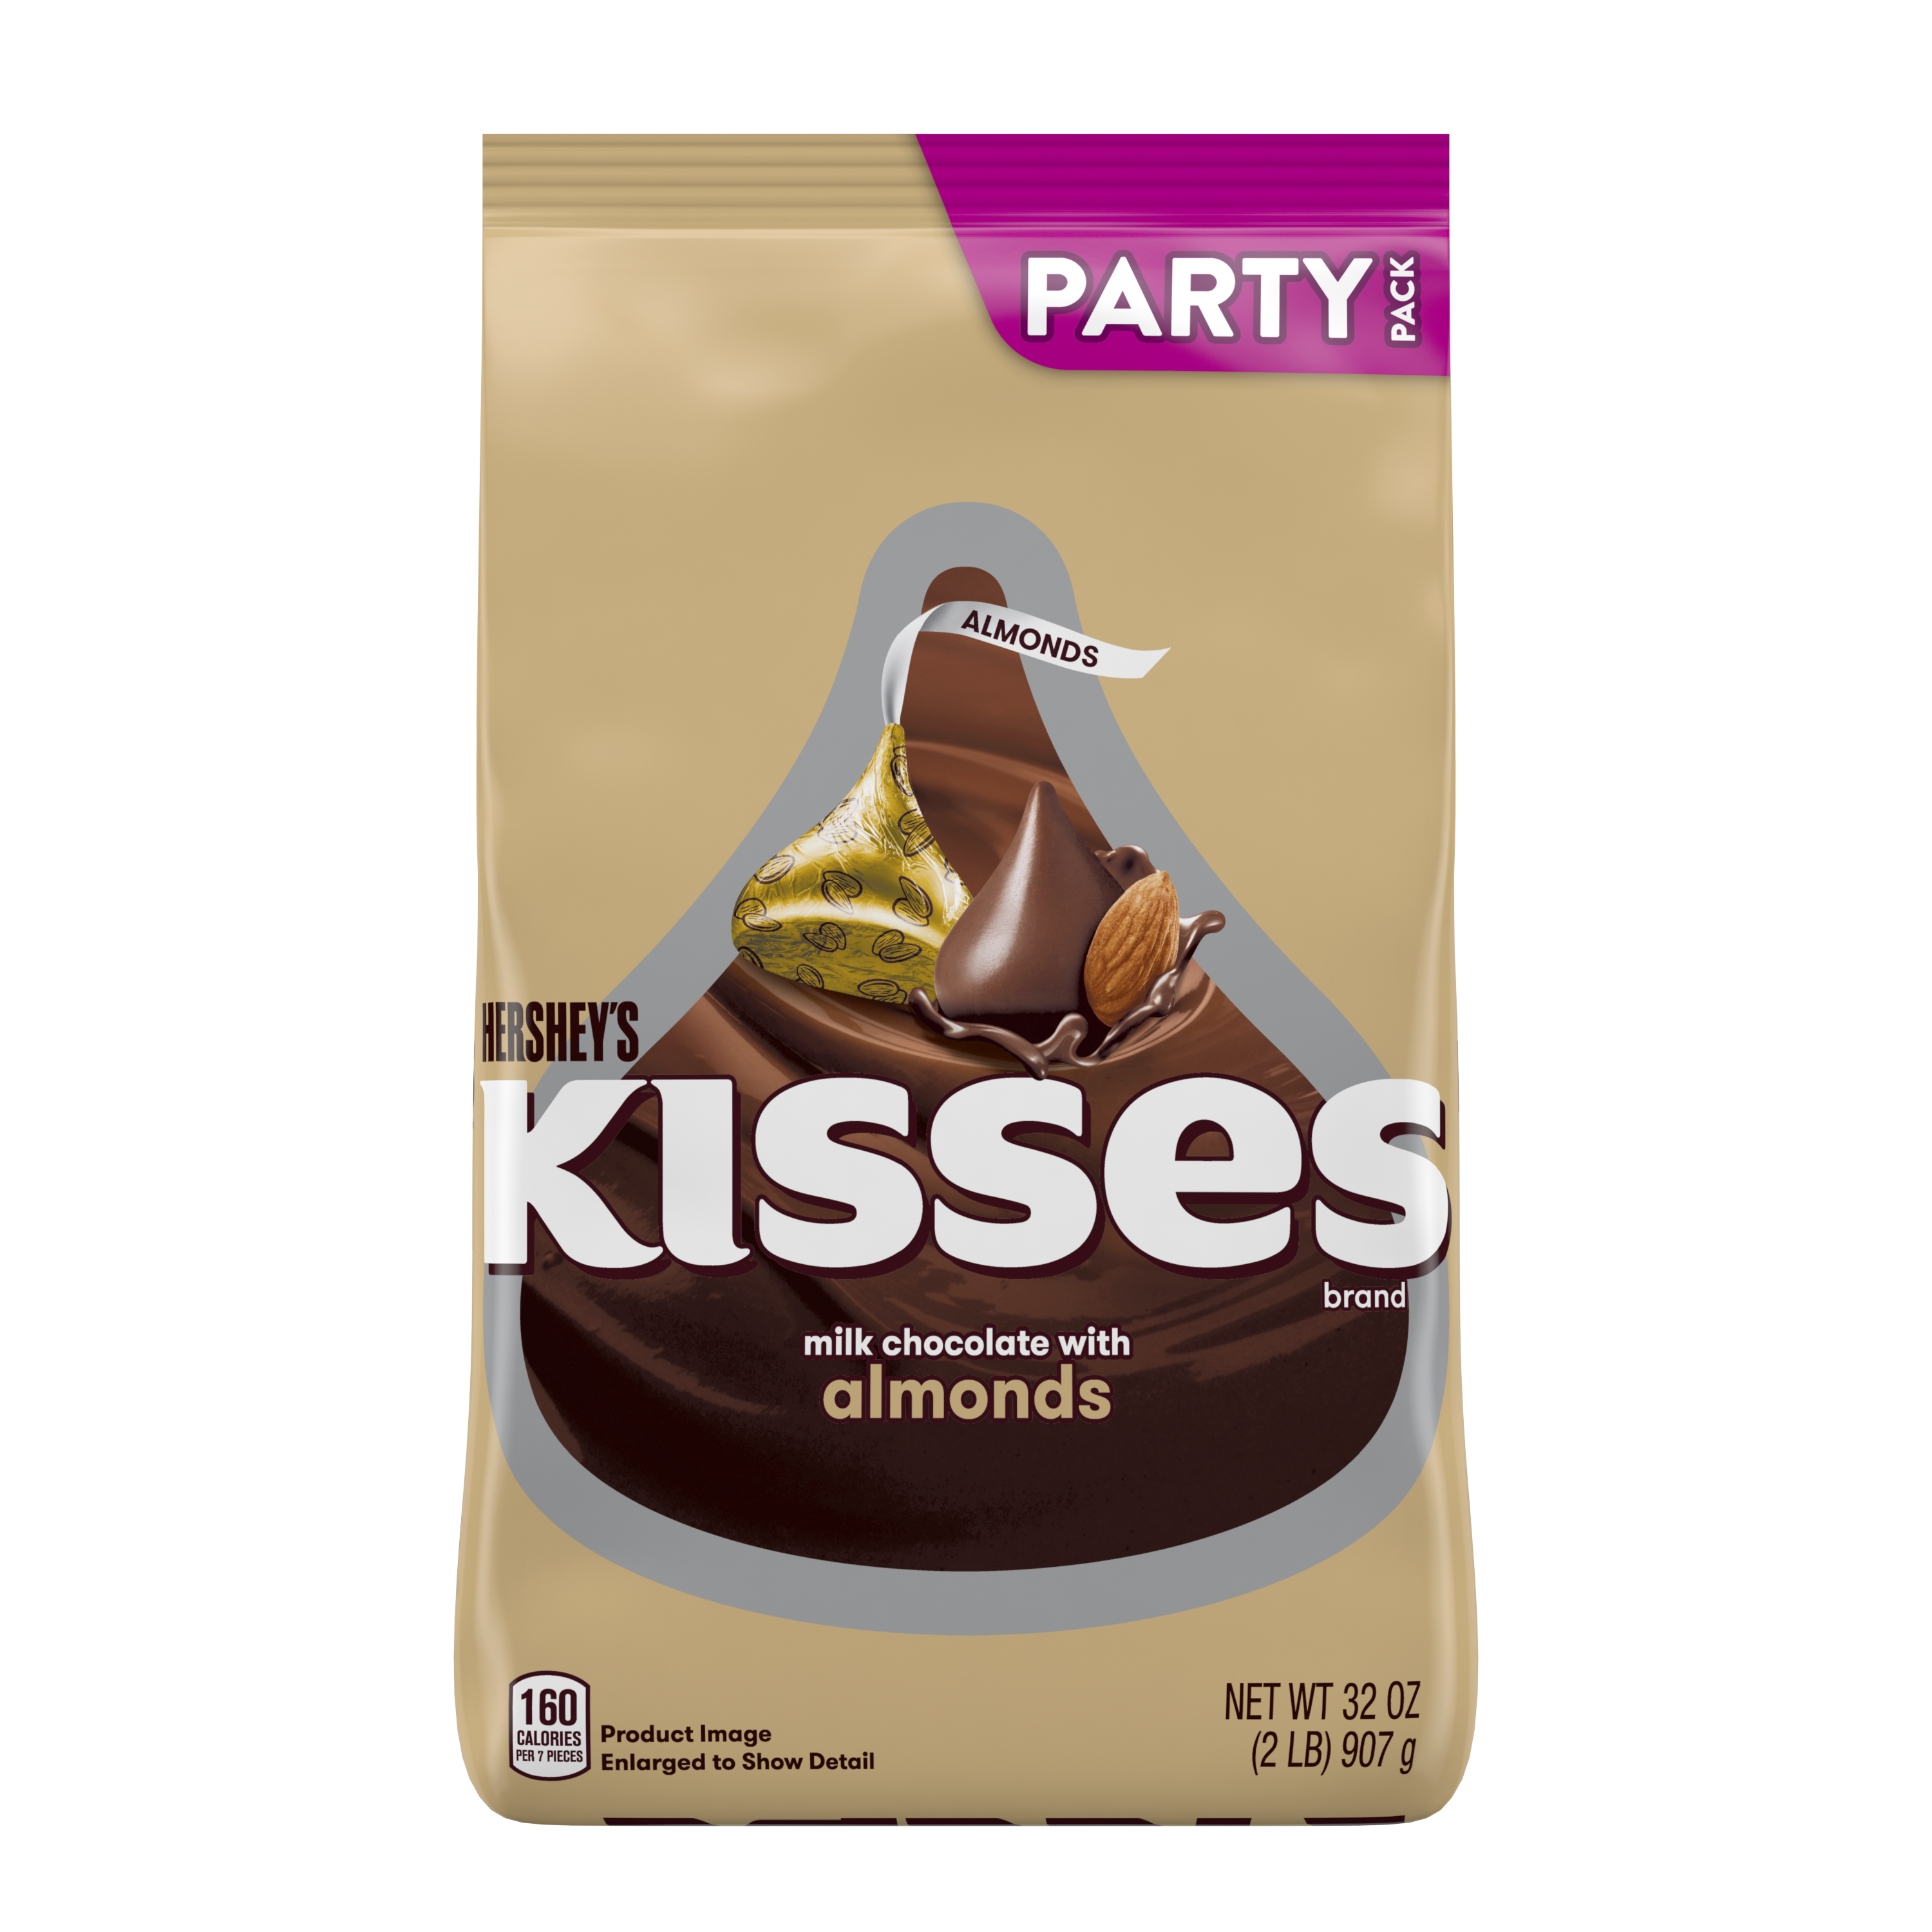 HERSHEY'S KISSES Milk Chocolate with Almonds Candy, 32 oz pack - Front of Package